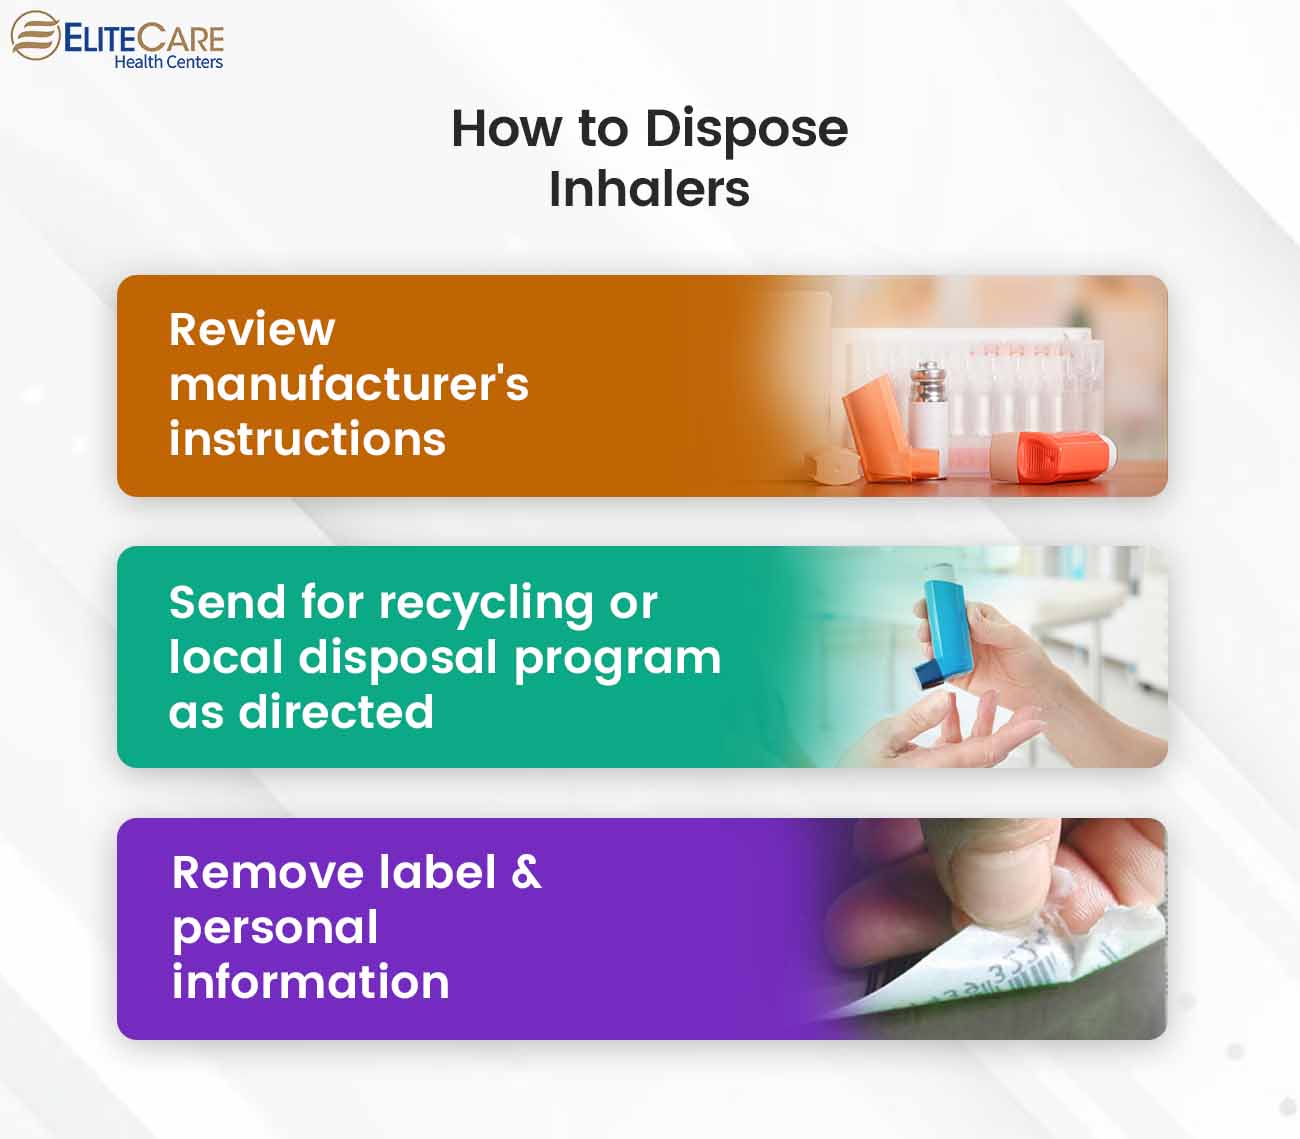 How to Dispose Inhalers